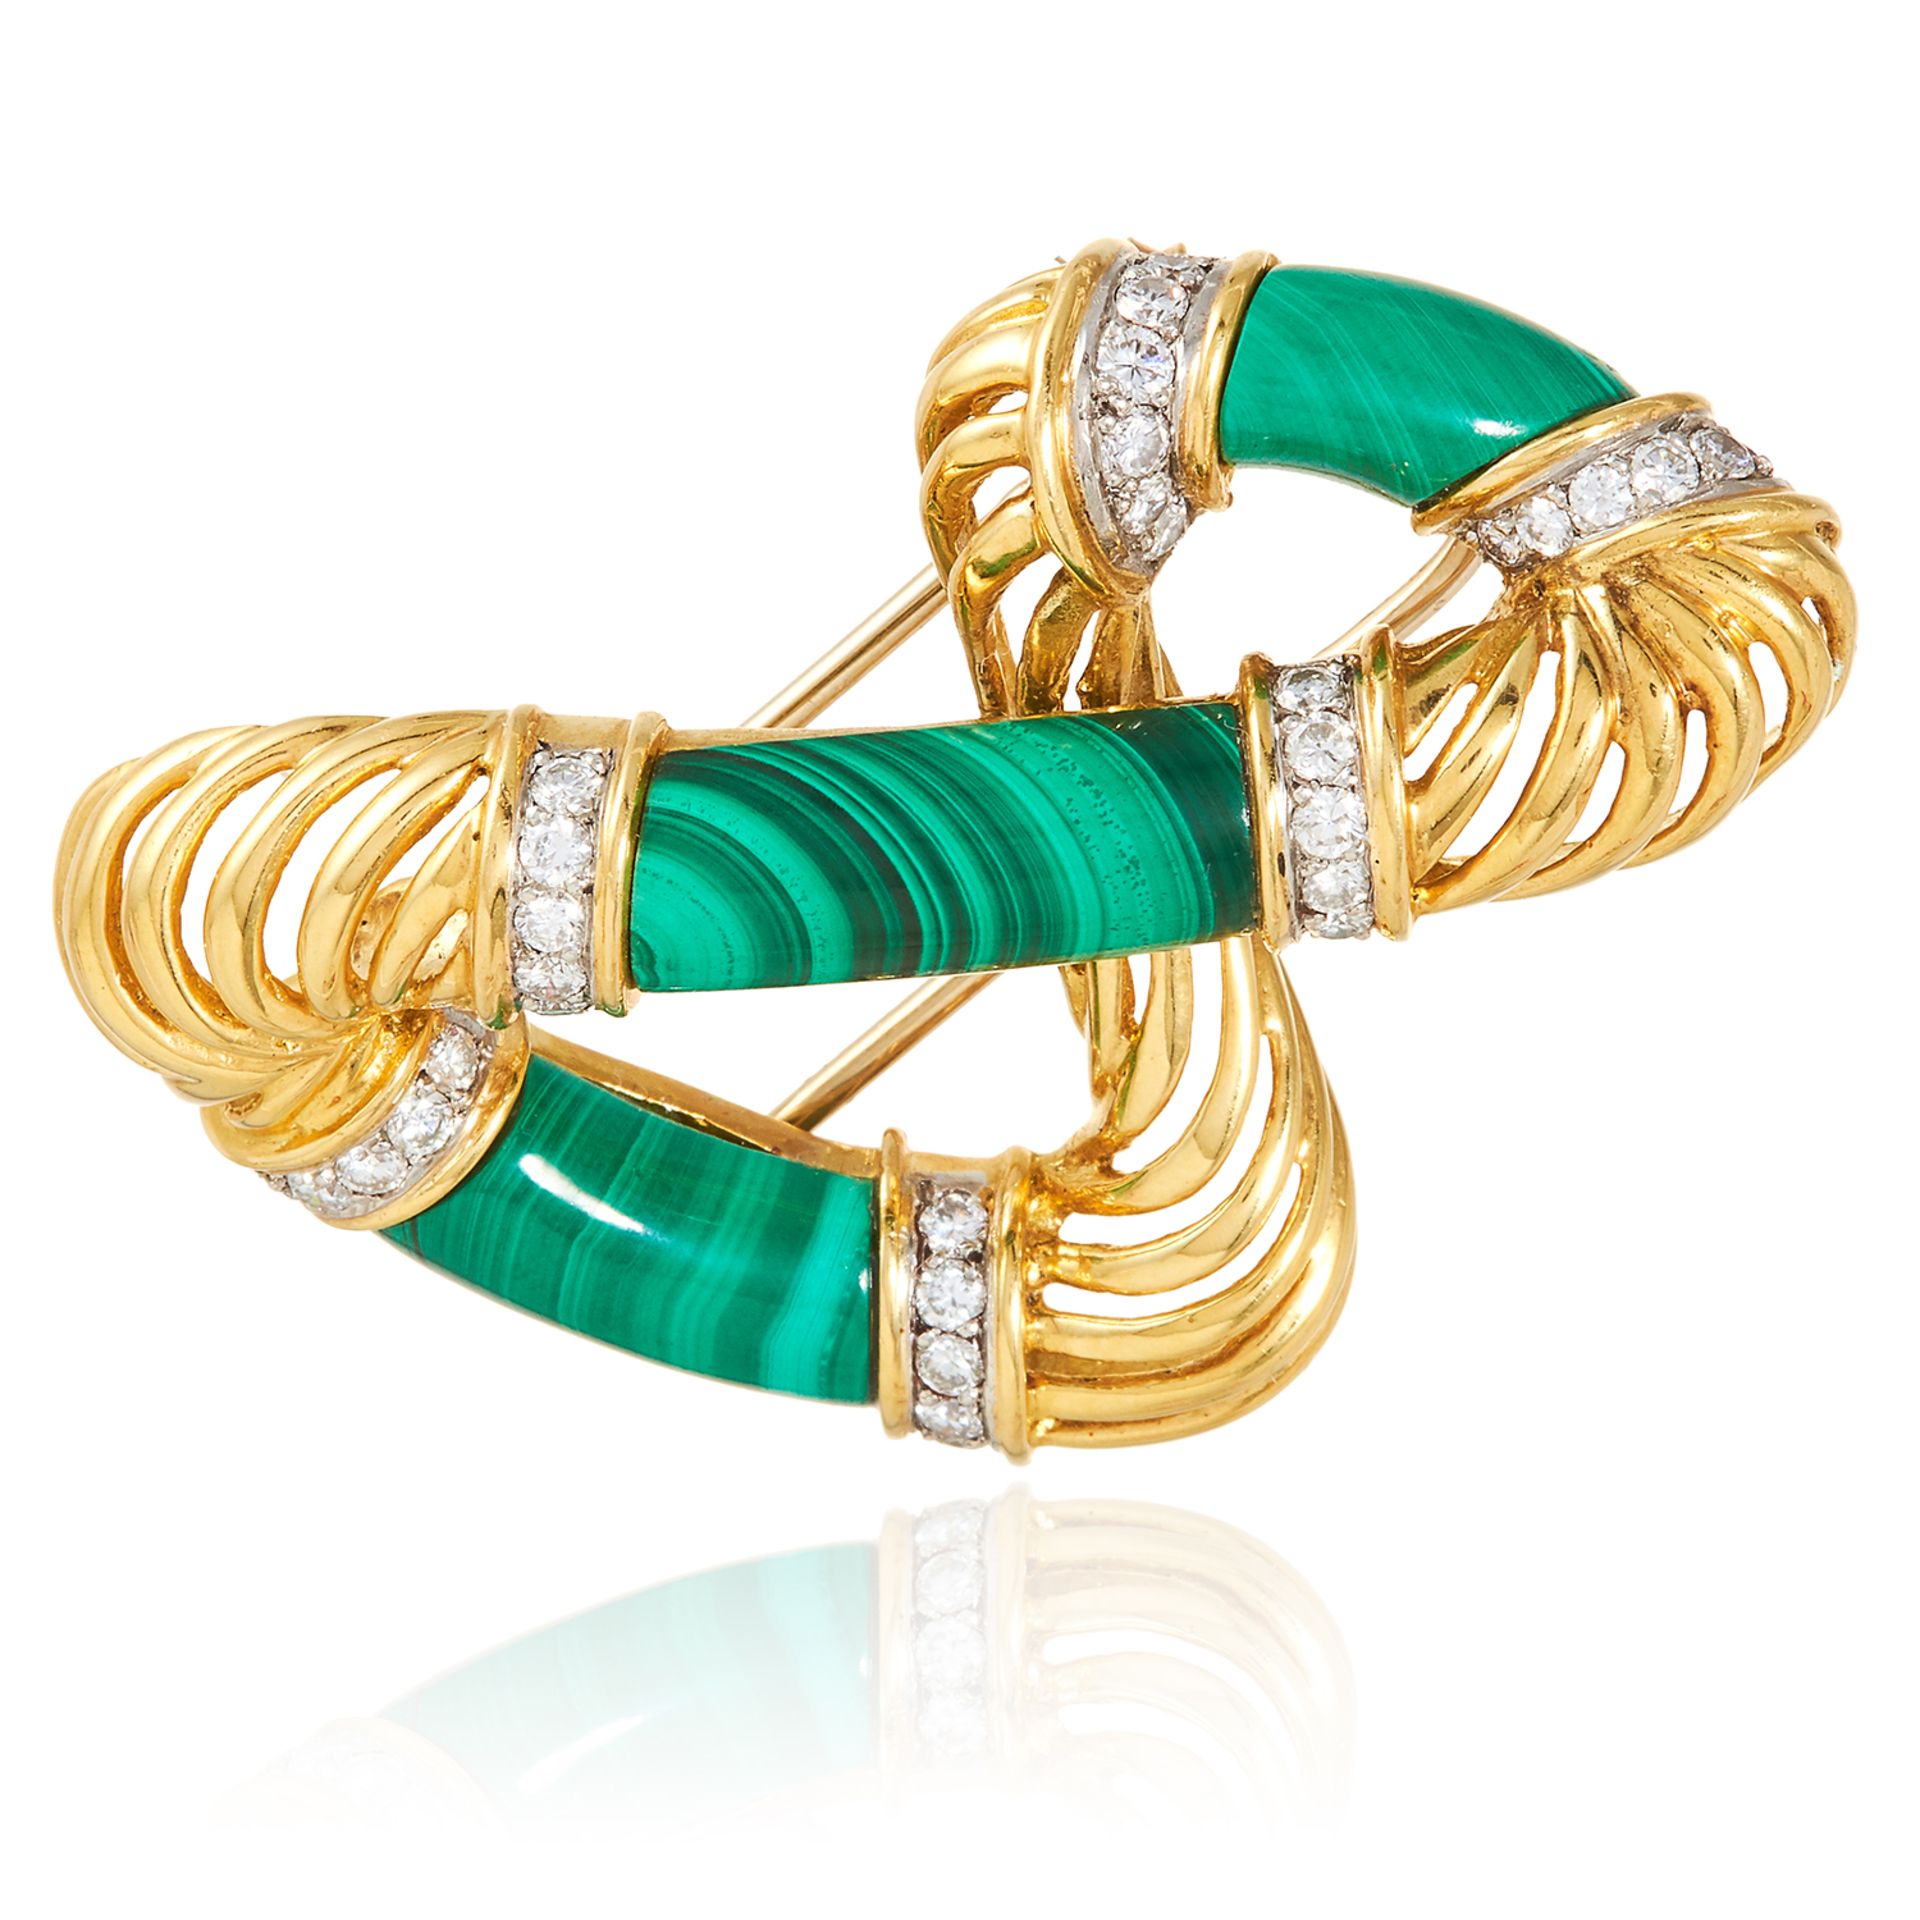 A VINTAGE DIAMOND AND MALACHITE BROOCH, MAUBOUSSIN in high carat yellow gold, designed in abstract